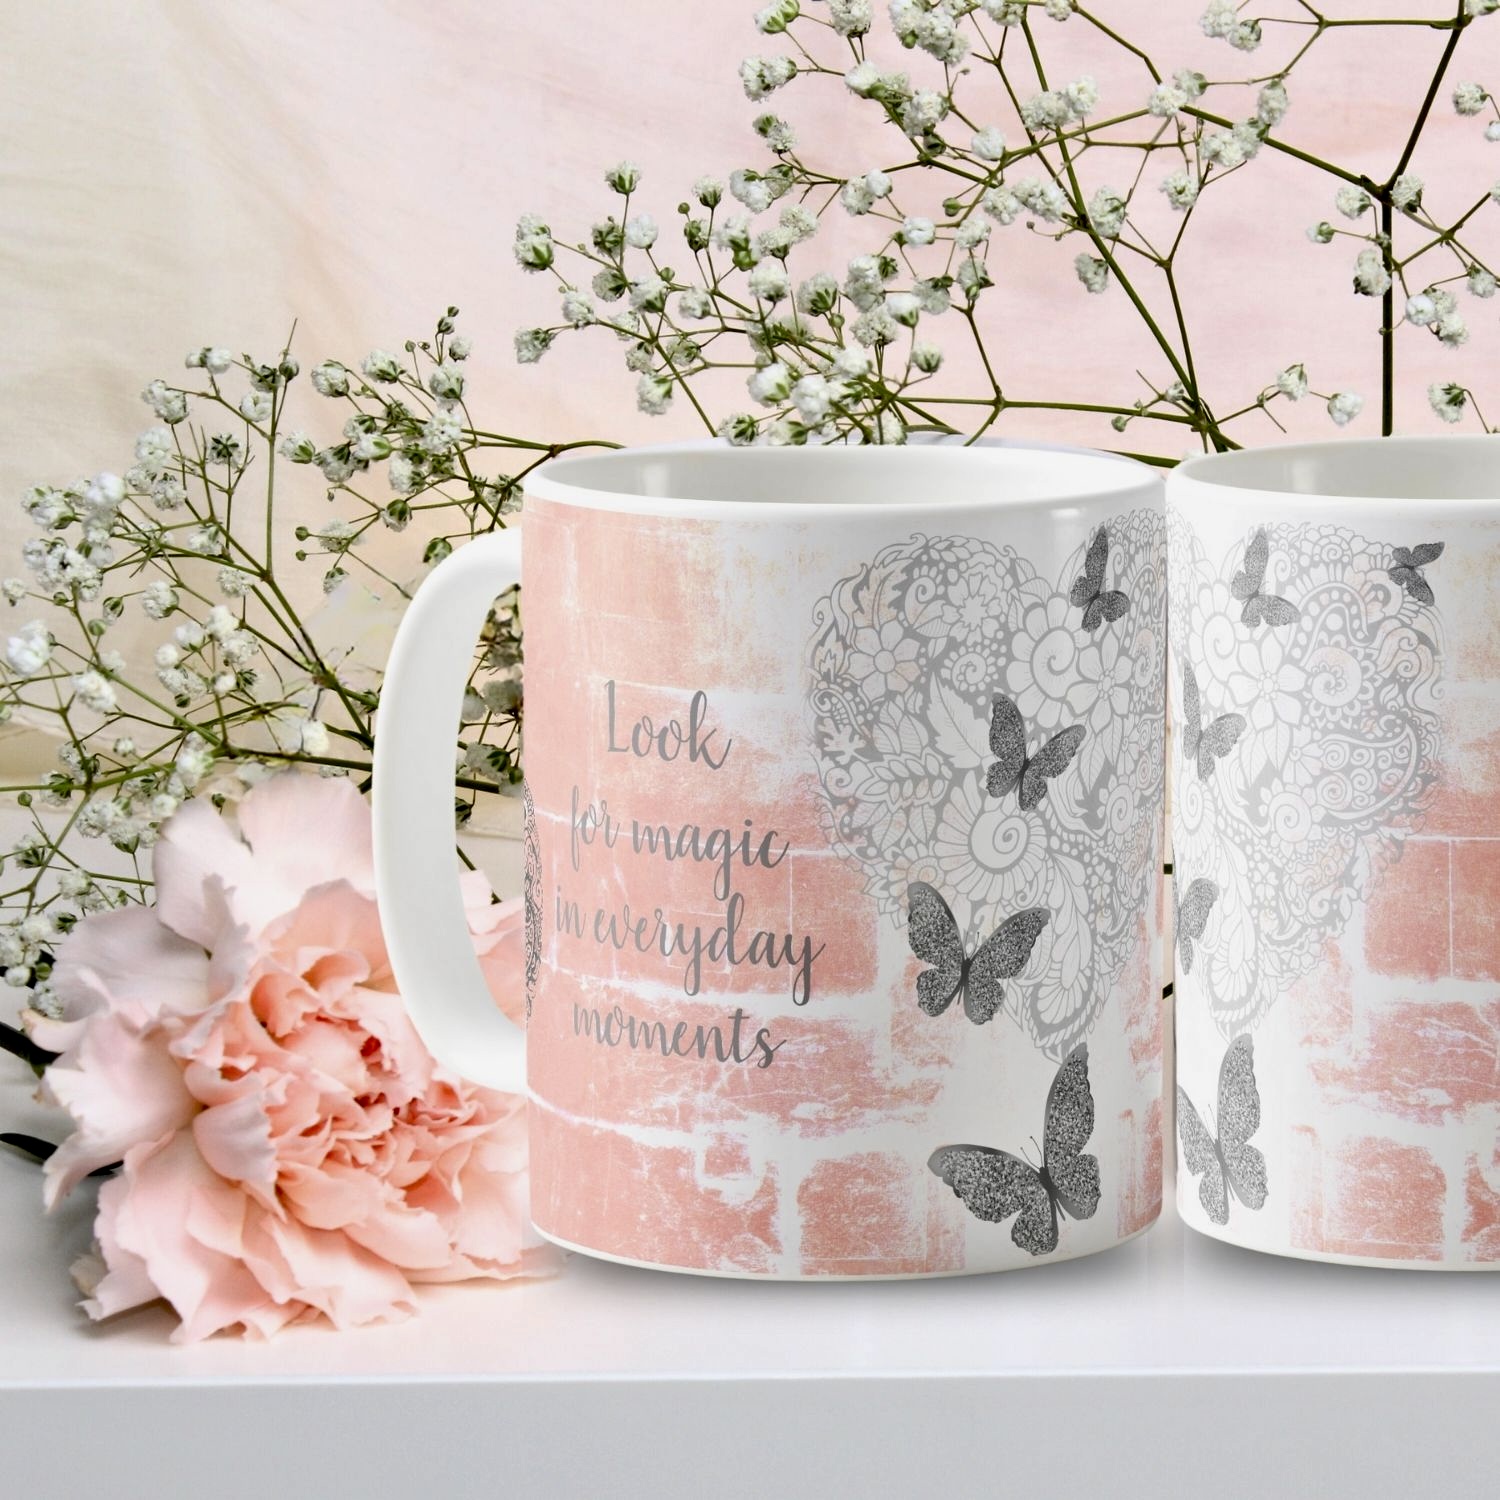 A rustic peach mug featuring a gray heart surrounded by silver butterflies, with an included inspirational message for added charm and elegance.